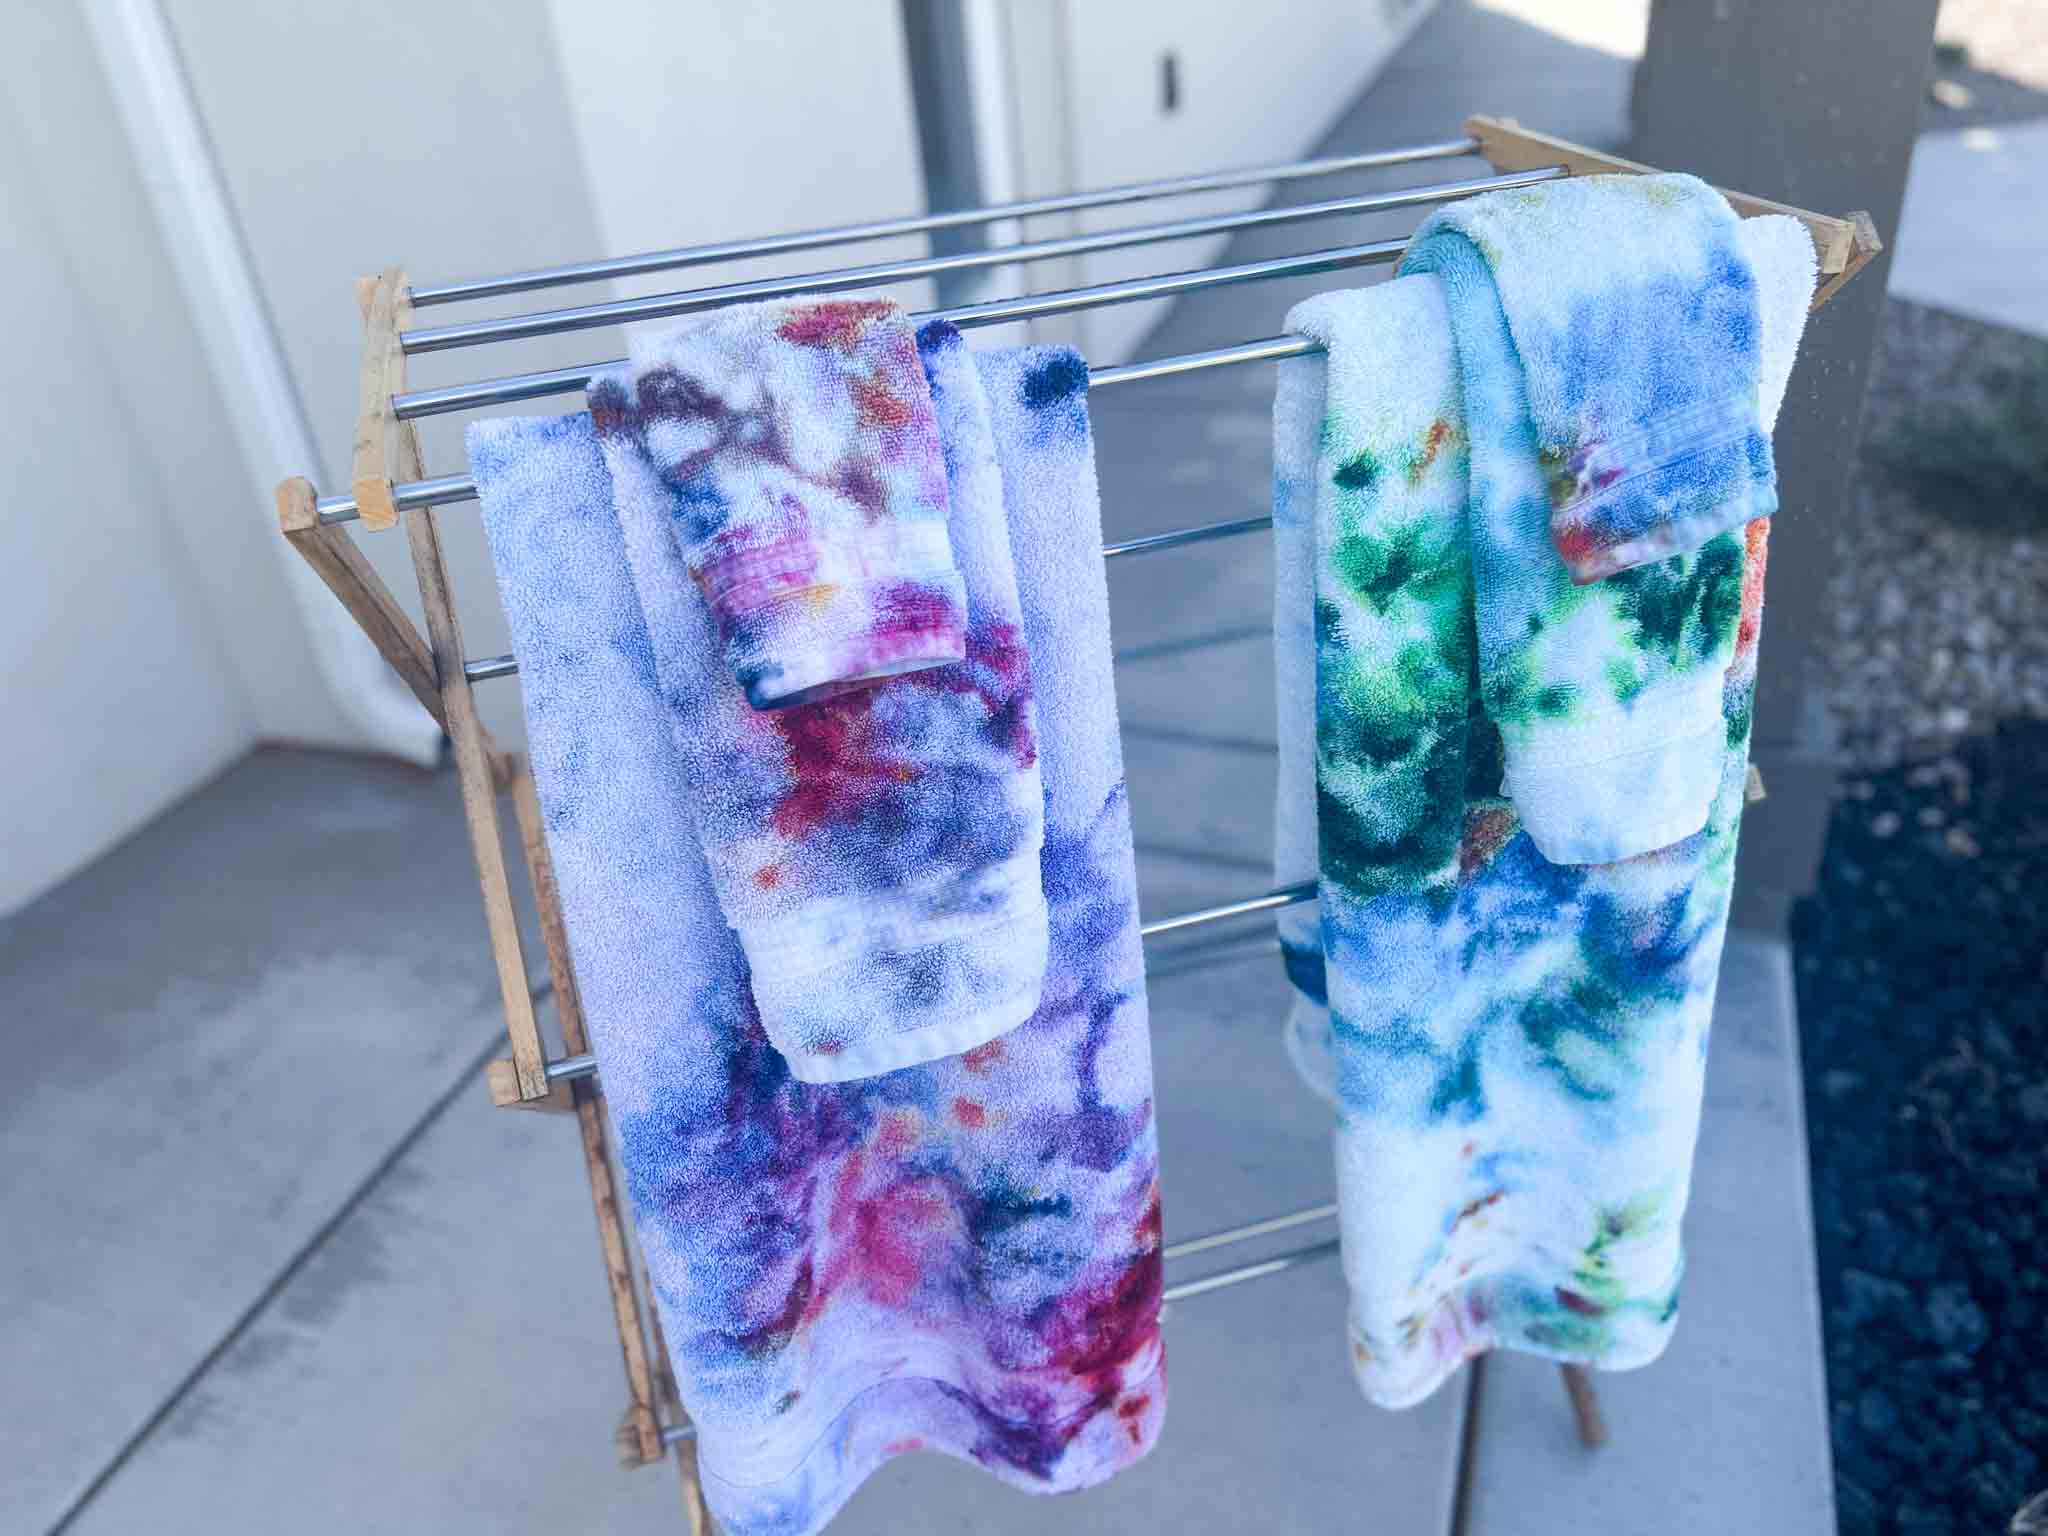 This tutorial will walk you through the ins and outs of how to tie dye bath towels. Whether new or used and dingy, let's make them art.